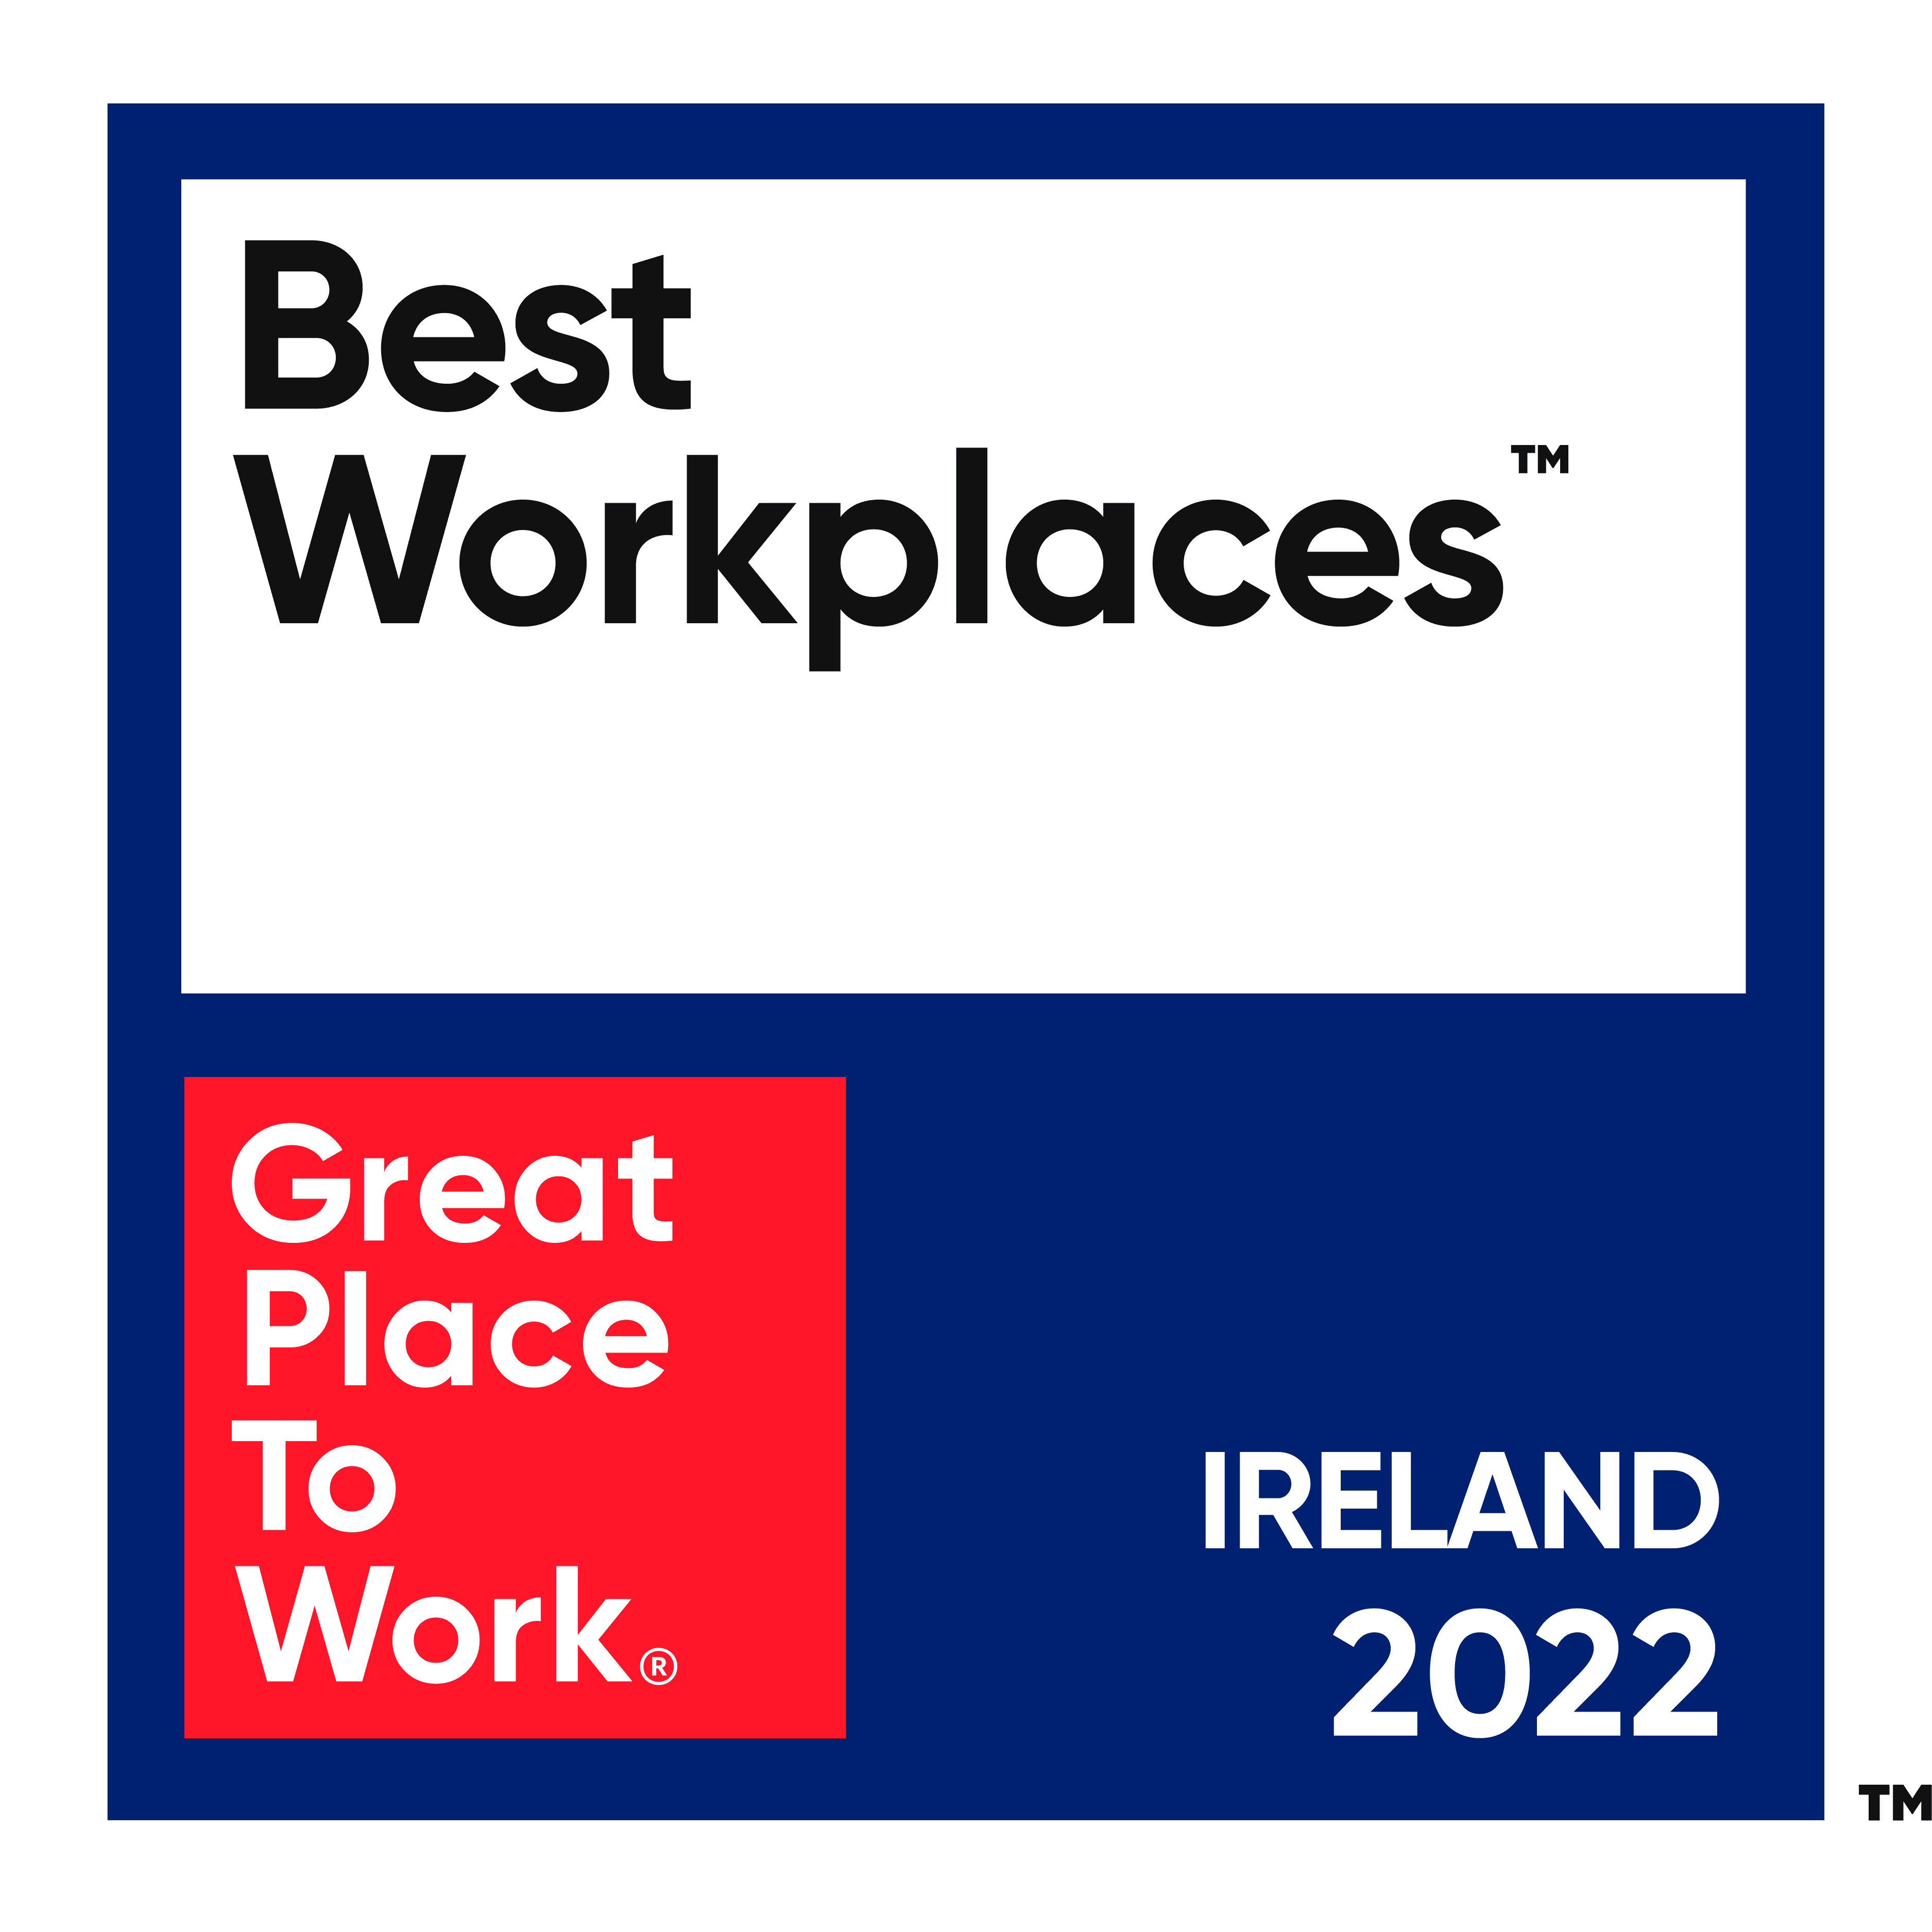 Best Workplaces 2022 Award Certification Europe